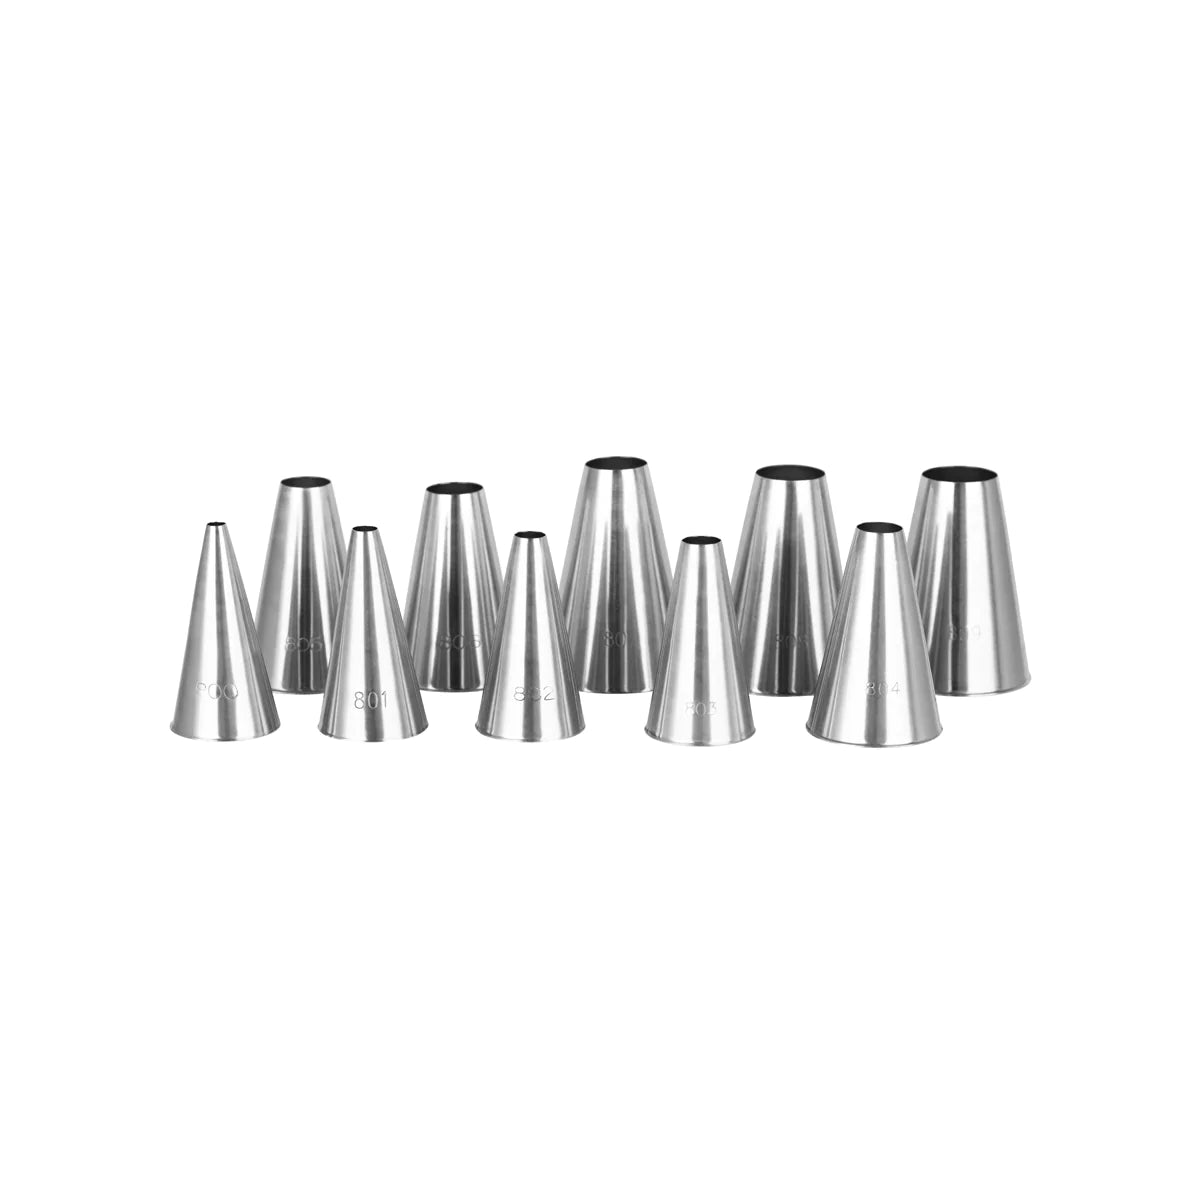 Piping Tube Plain Set 10pc Stainless Steel